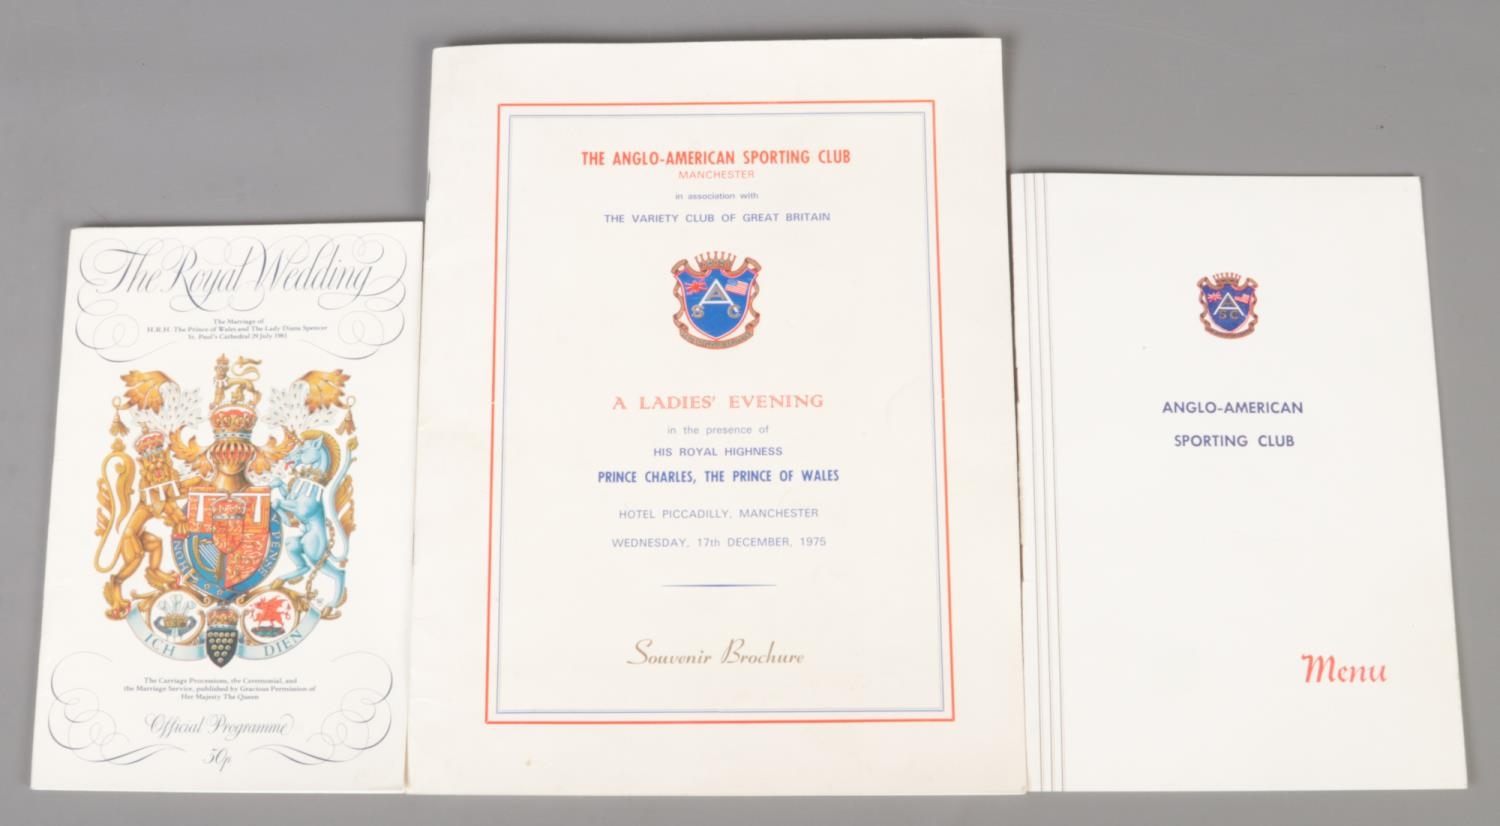 The Anglo-American Sporting Club Souvenir Brochure and matching menu along with a The Royal